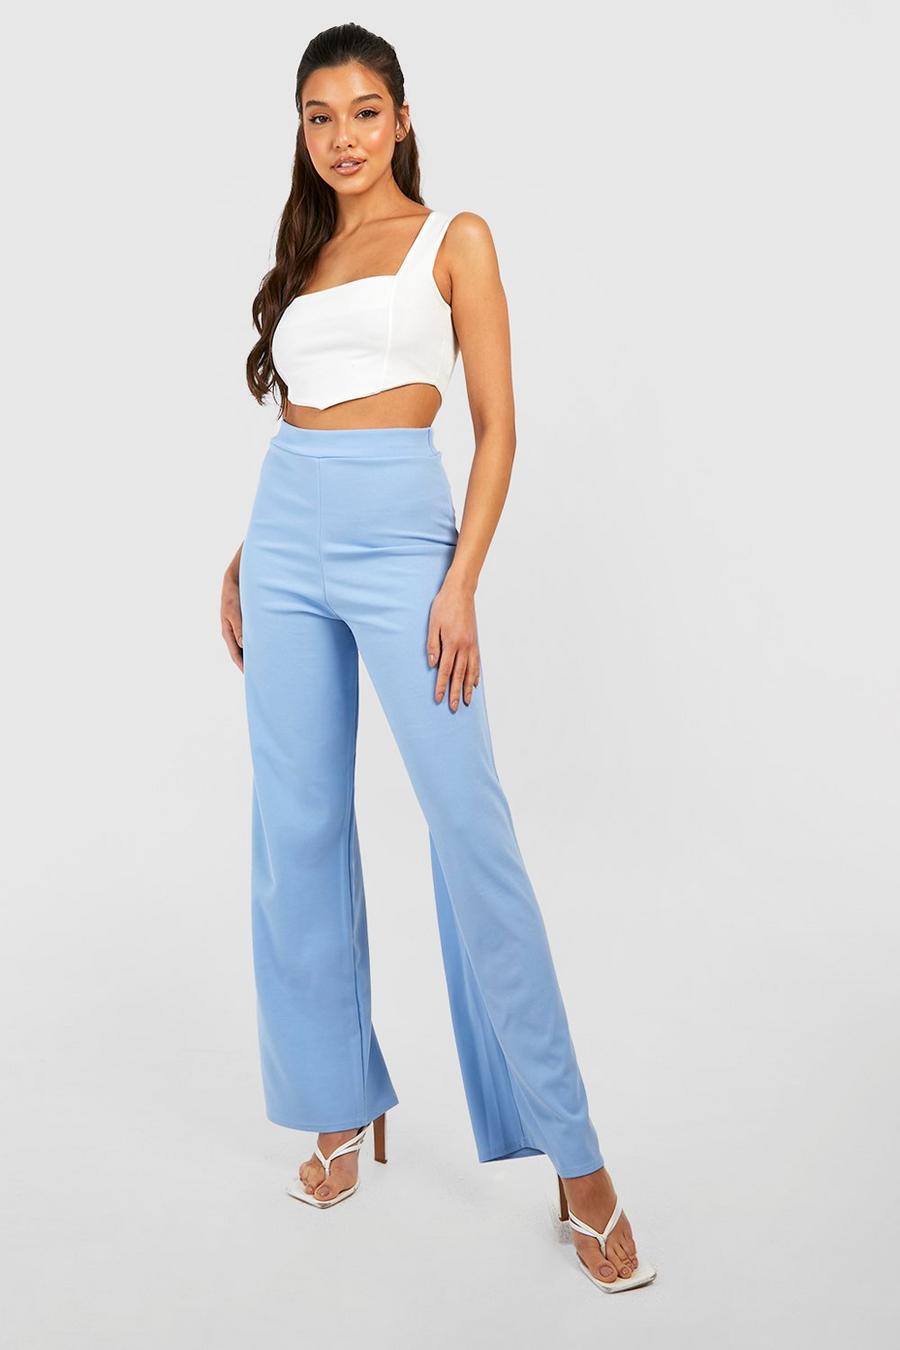 Powder blue Jersey Knit Slouchy Wide Leg Pants image number 1